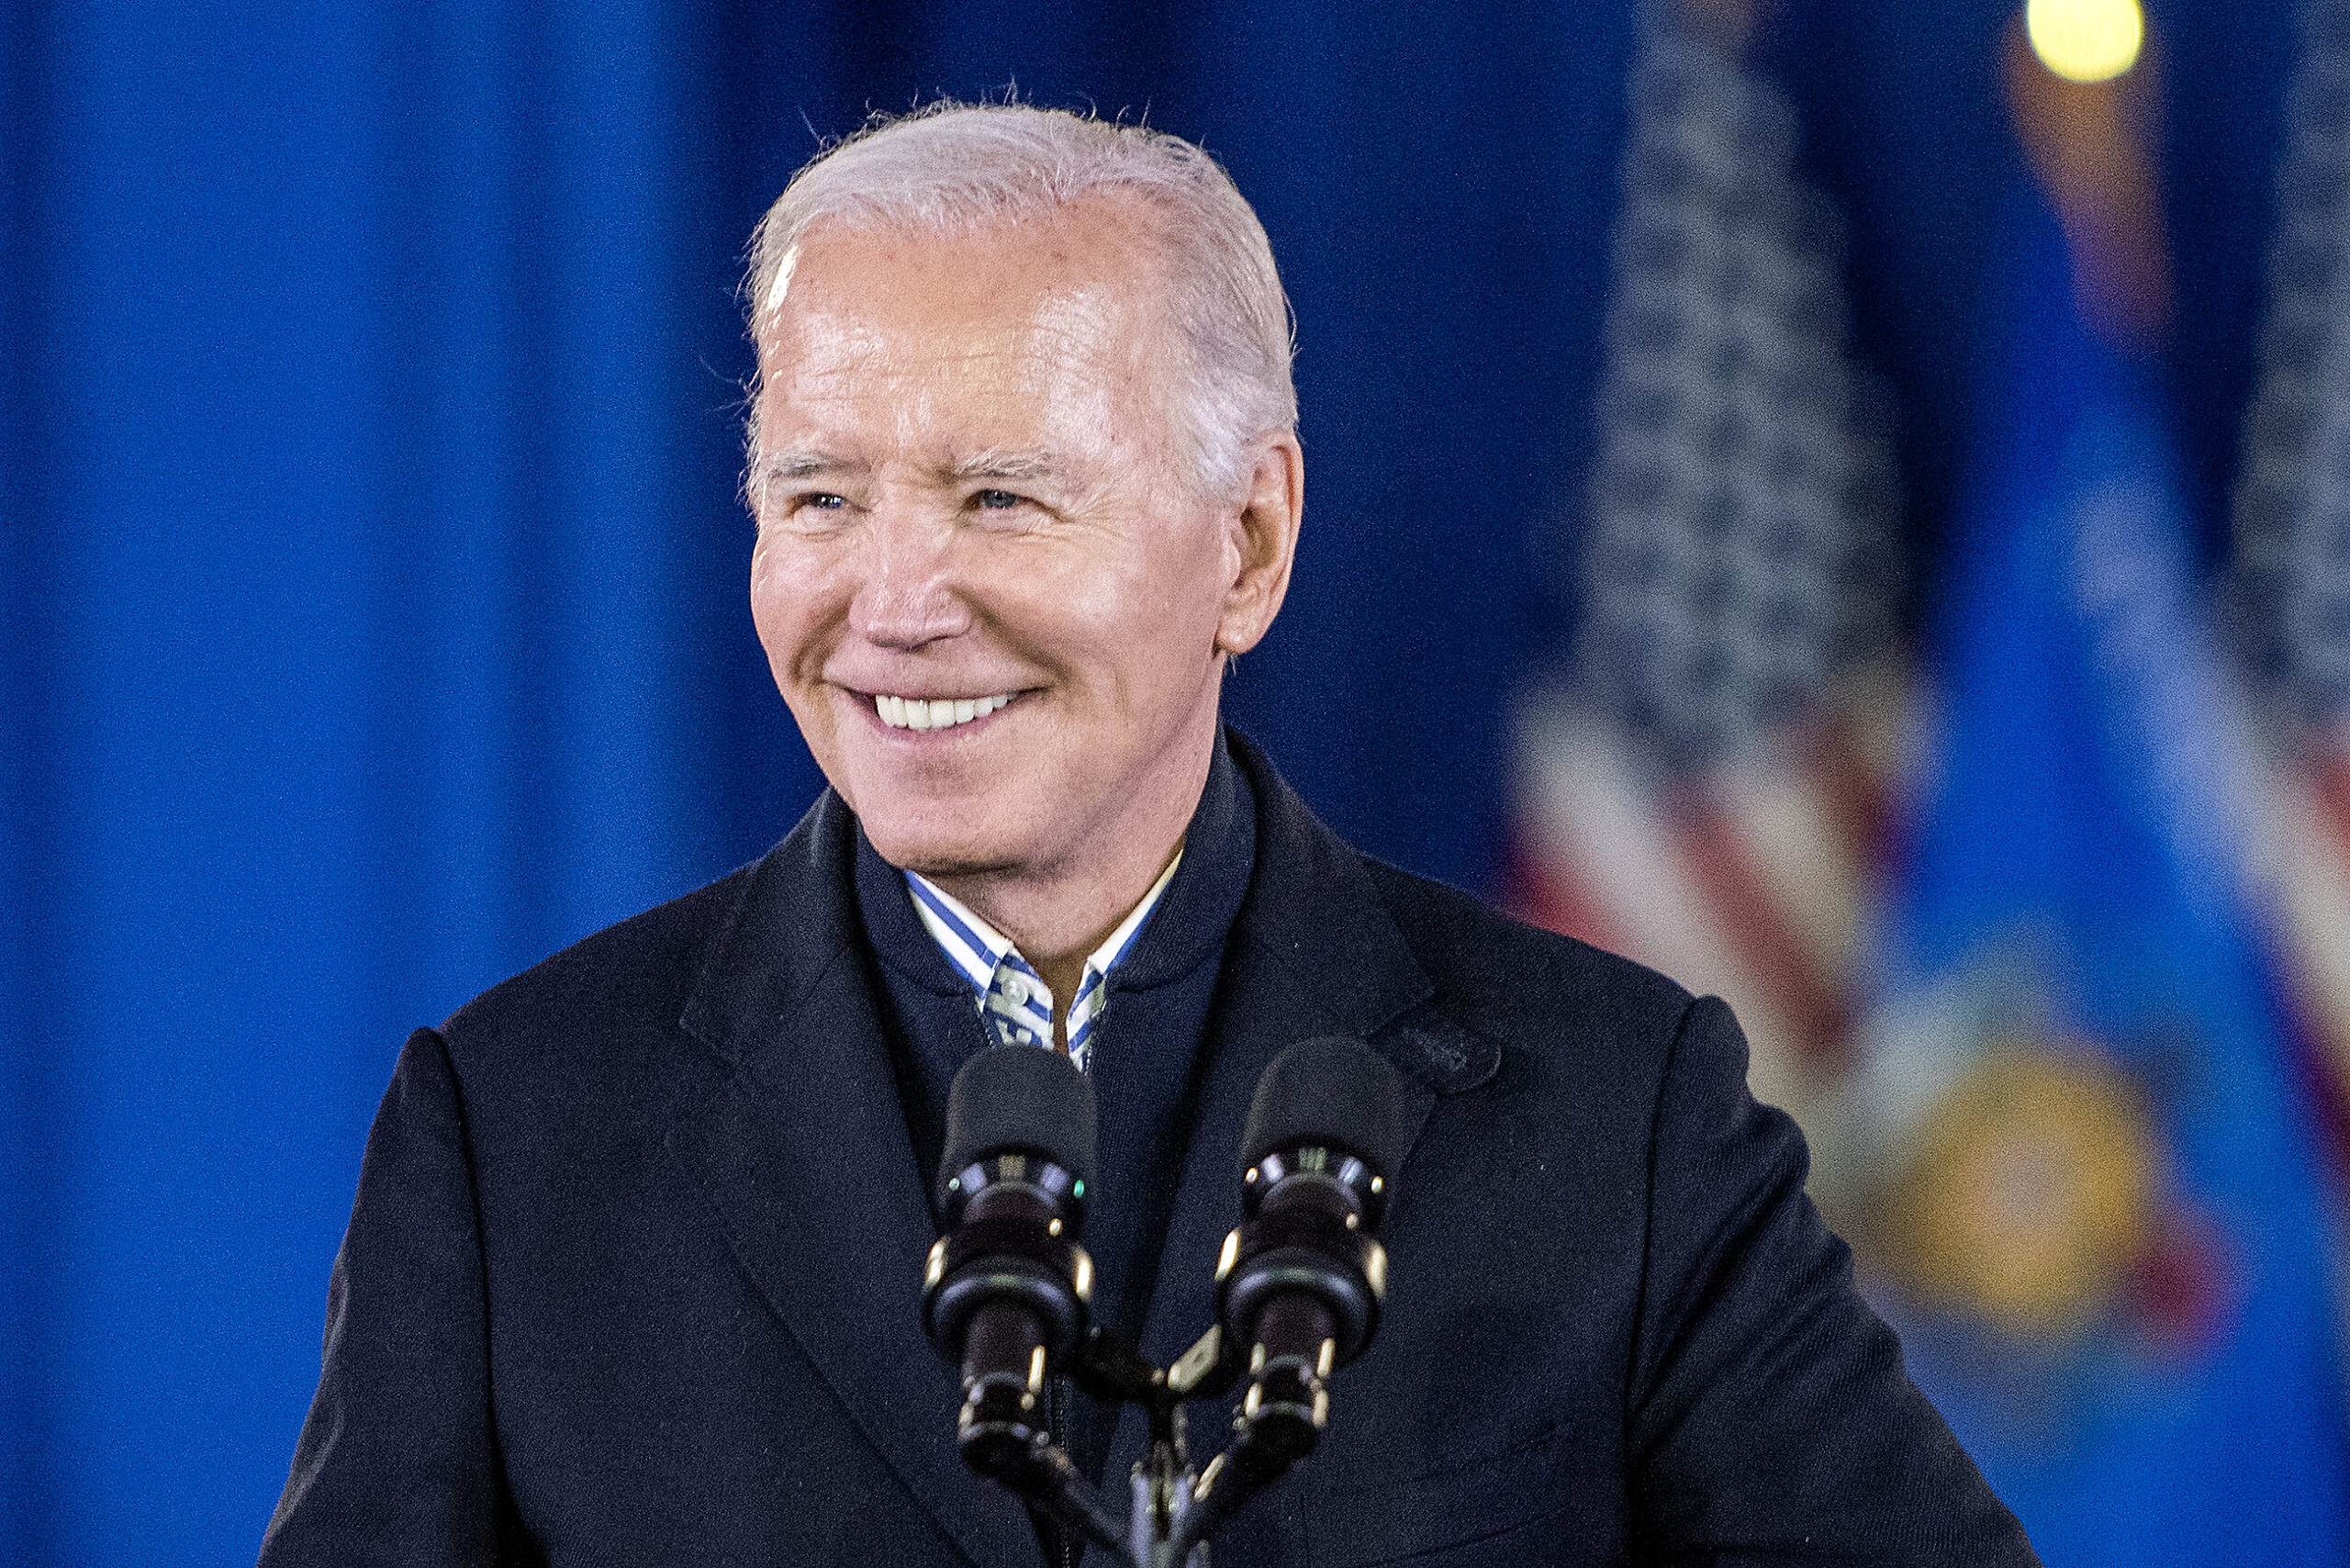 Biden smiles as he arrives on stage.